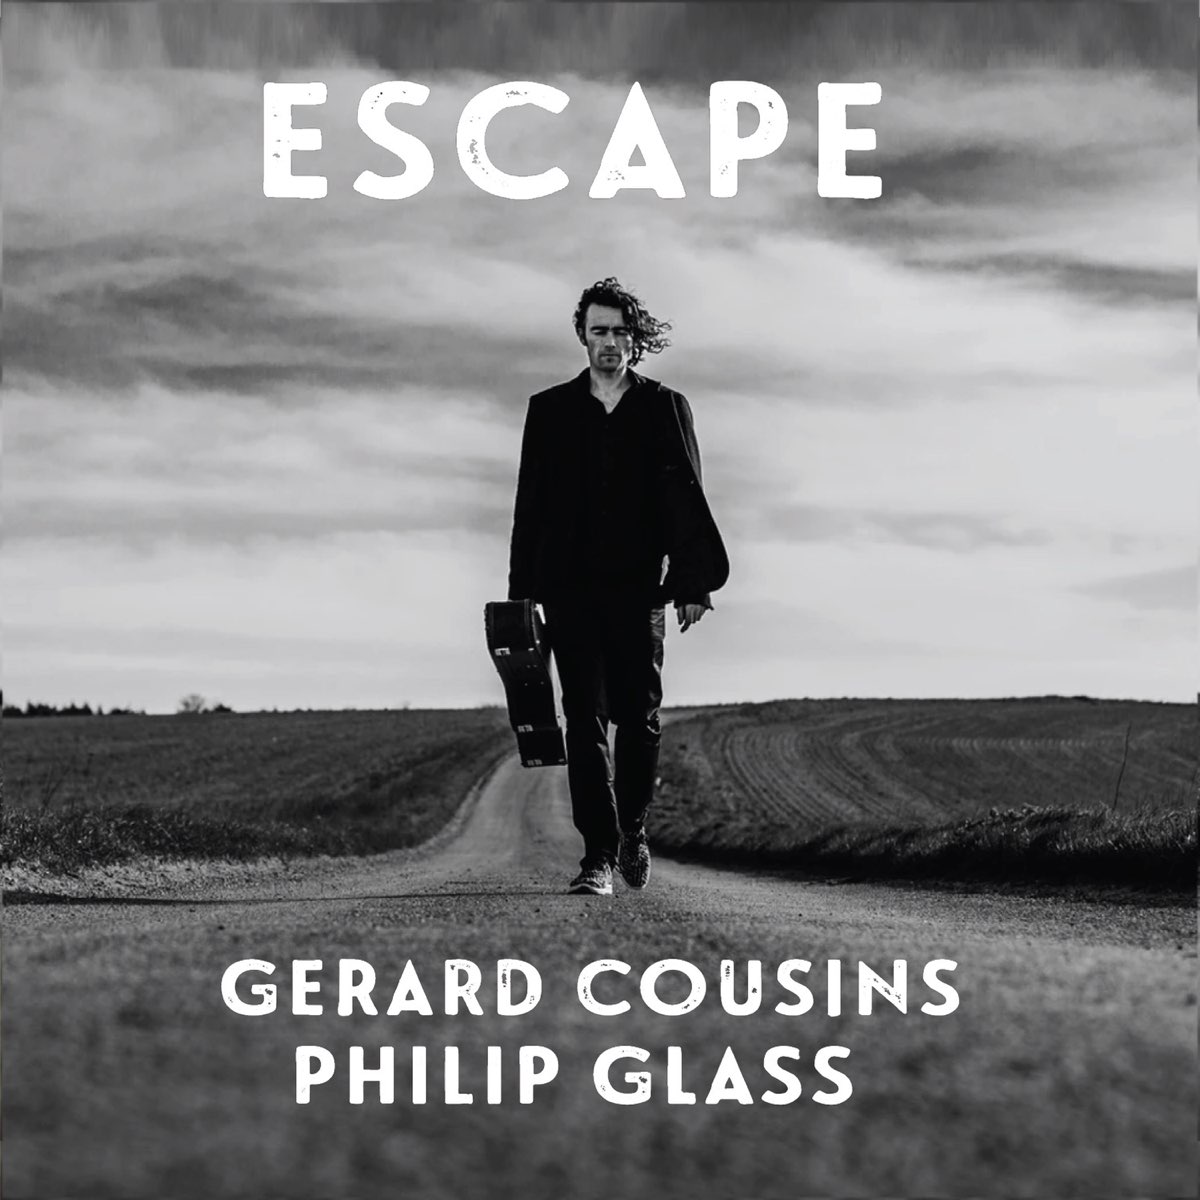 Philip Glass: Escape by Gerard Cousins on Apple Music